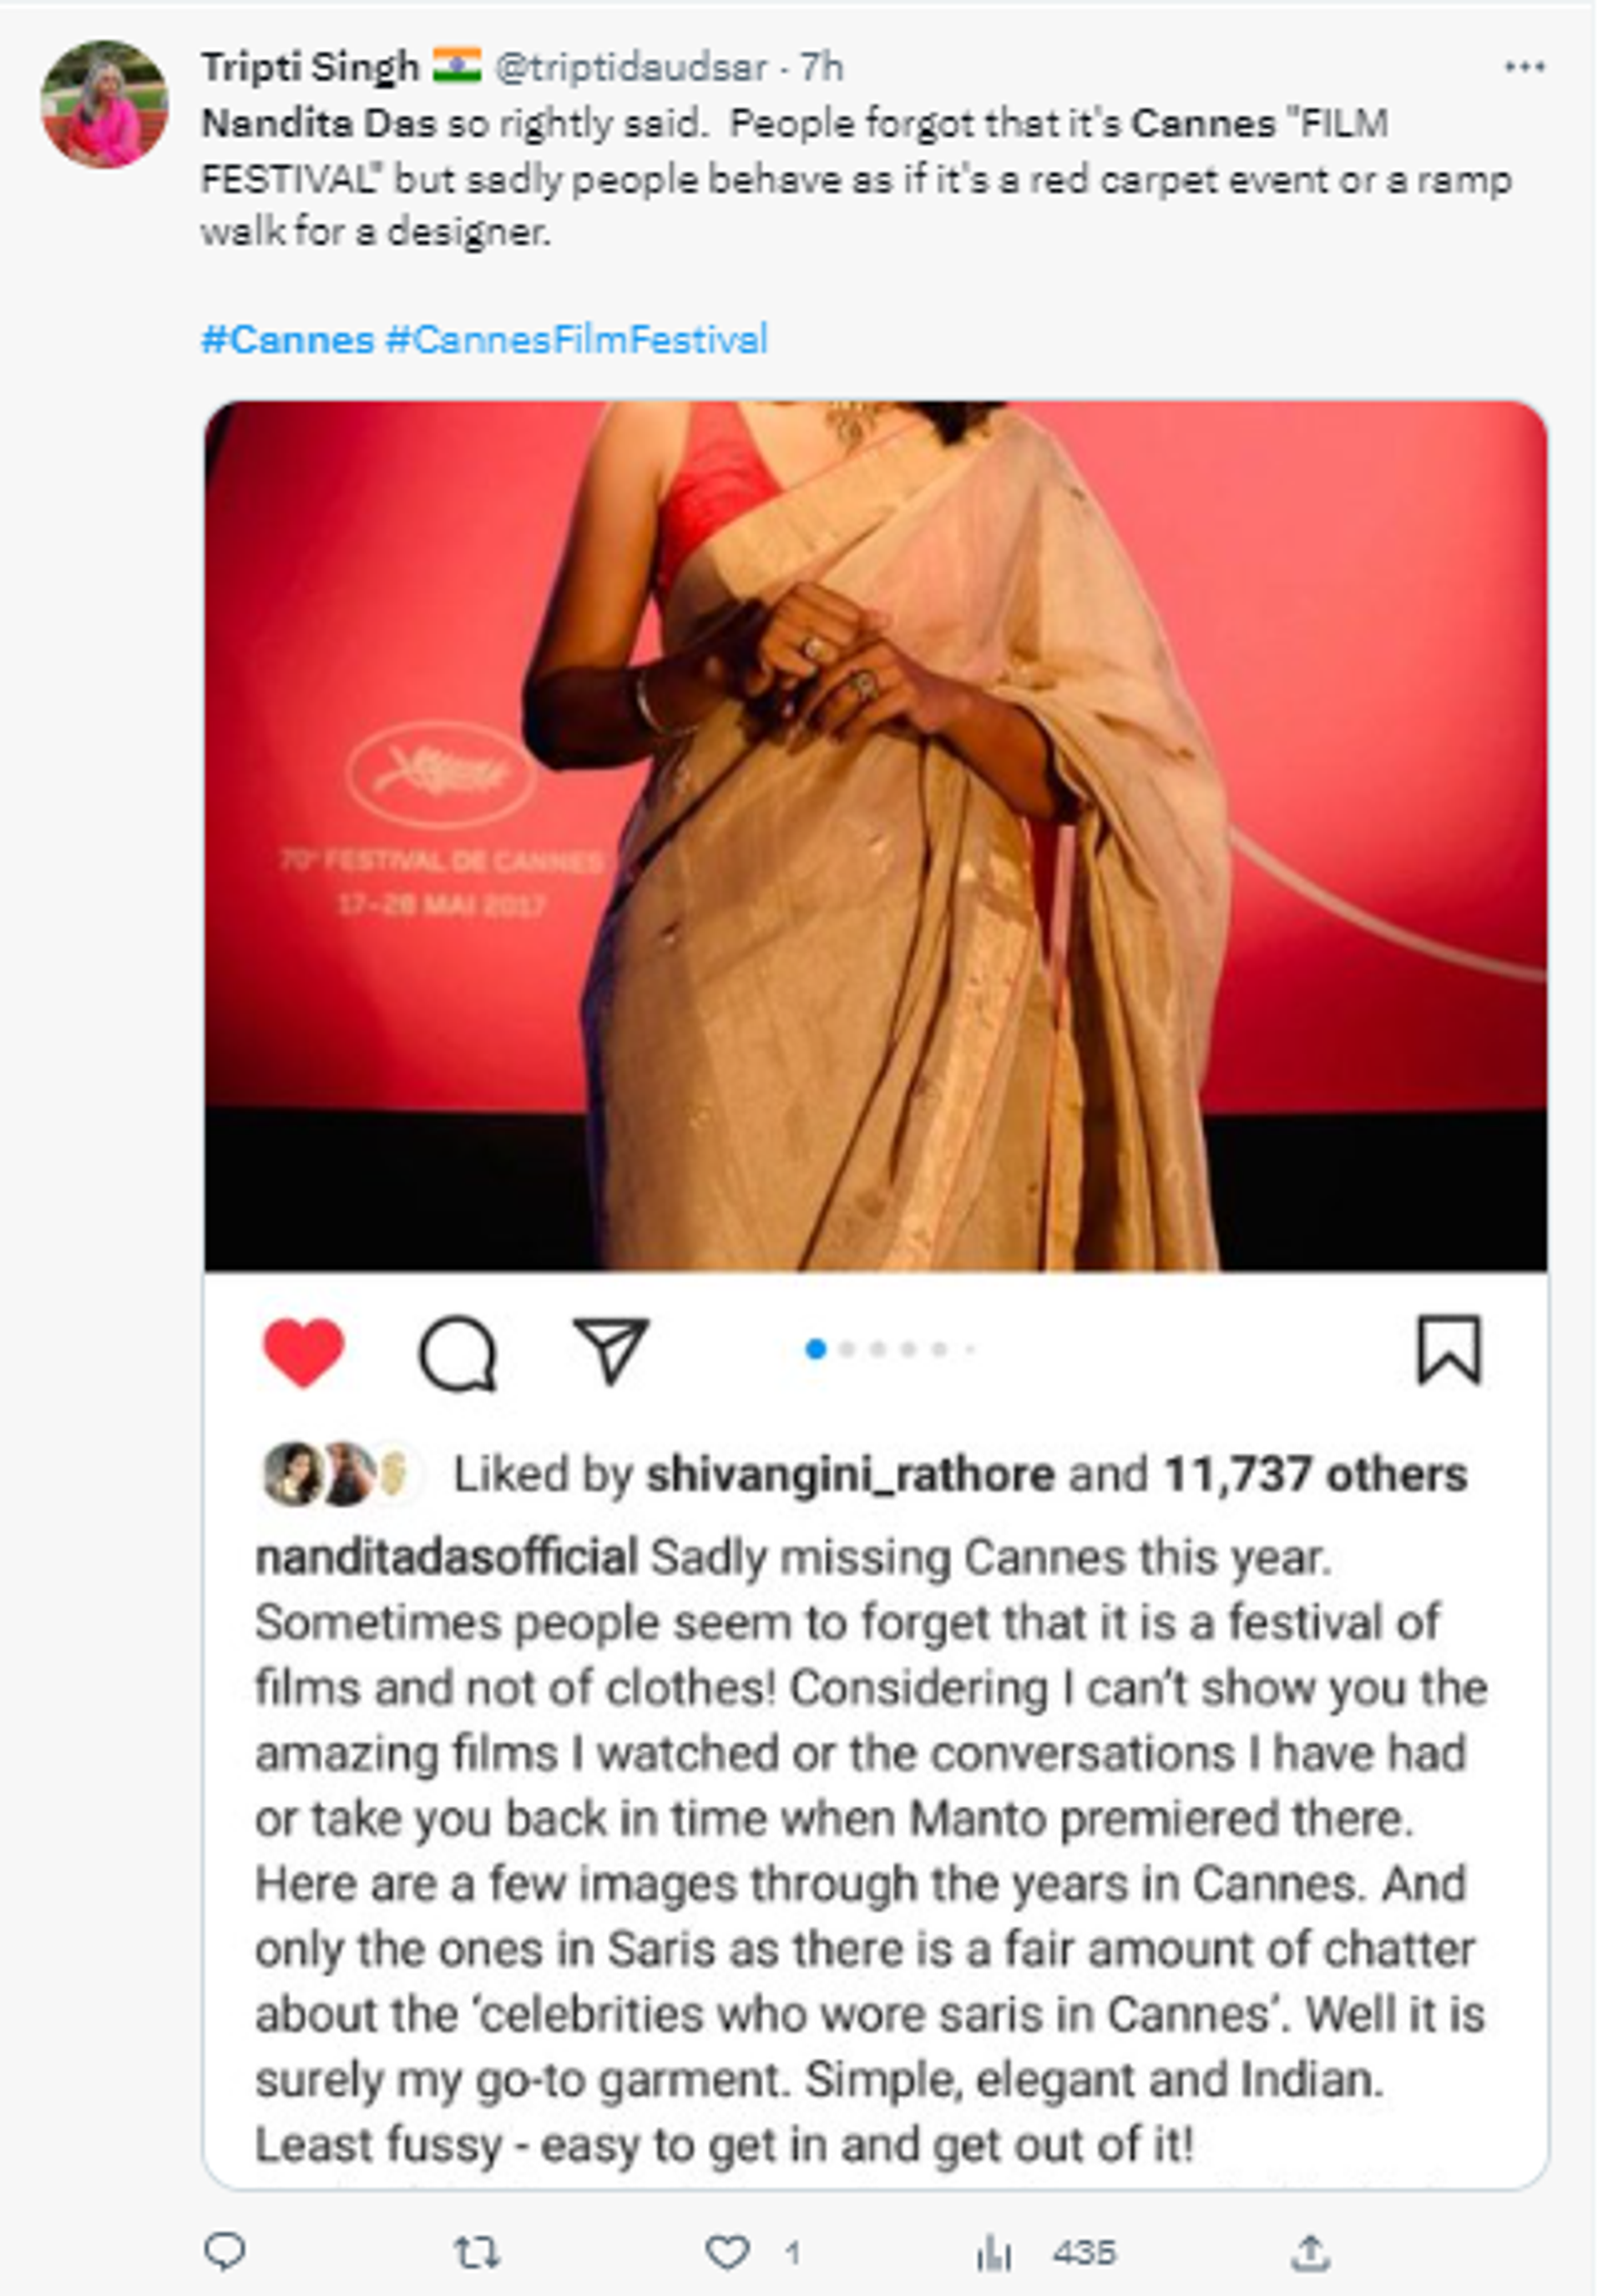 Renowned Indian actor-director Nandita Das express sorrow over reduction of Cannes Film Festival to mere fashion event  - Sputnik India, 1920, 22.05.2023